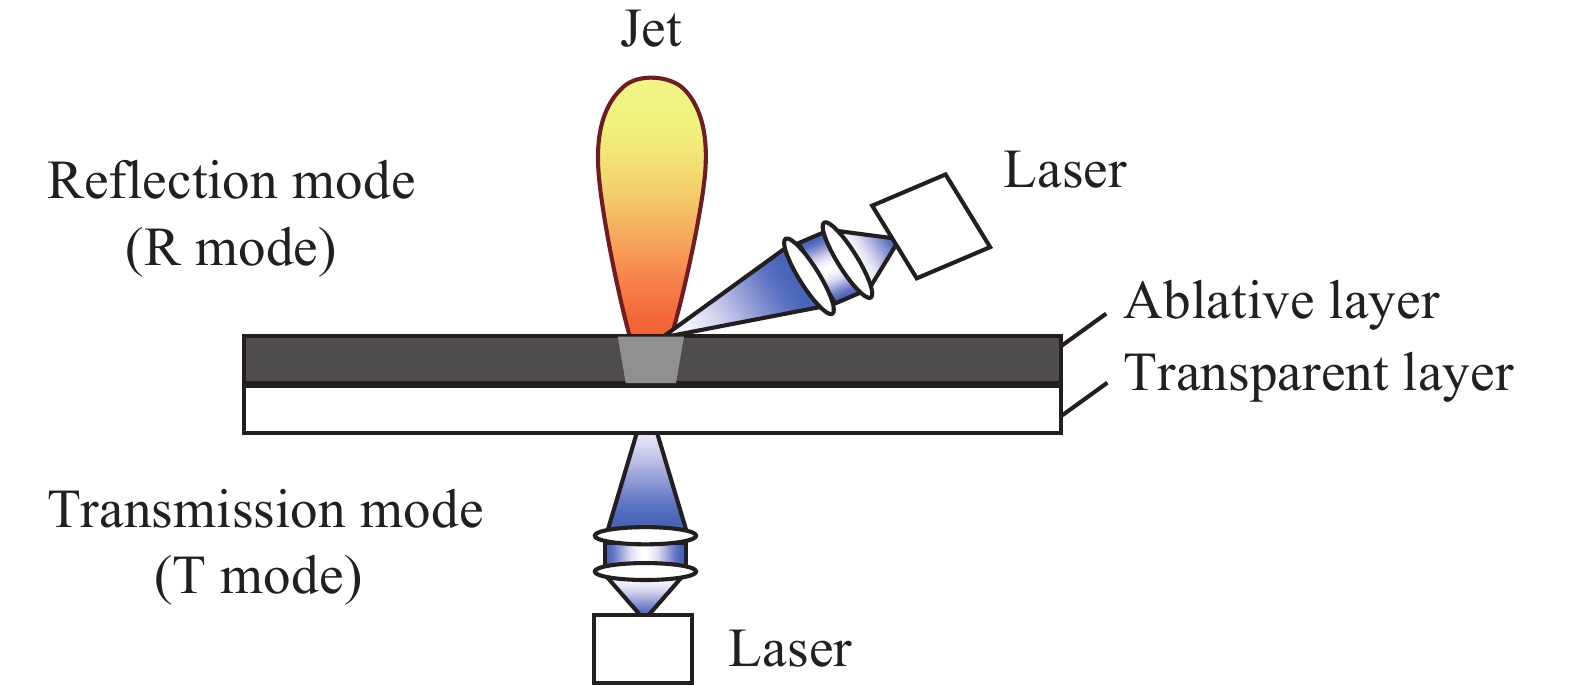 Transmission and reflection modes of laser propulsion